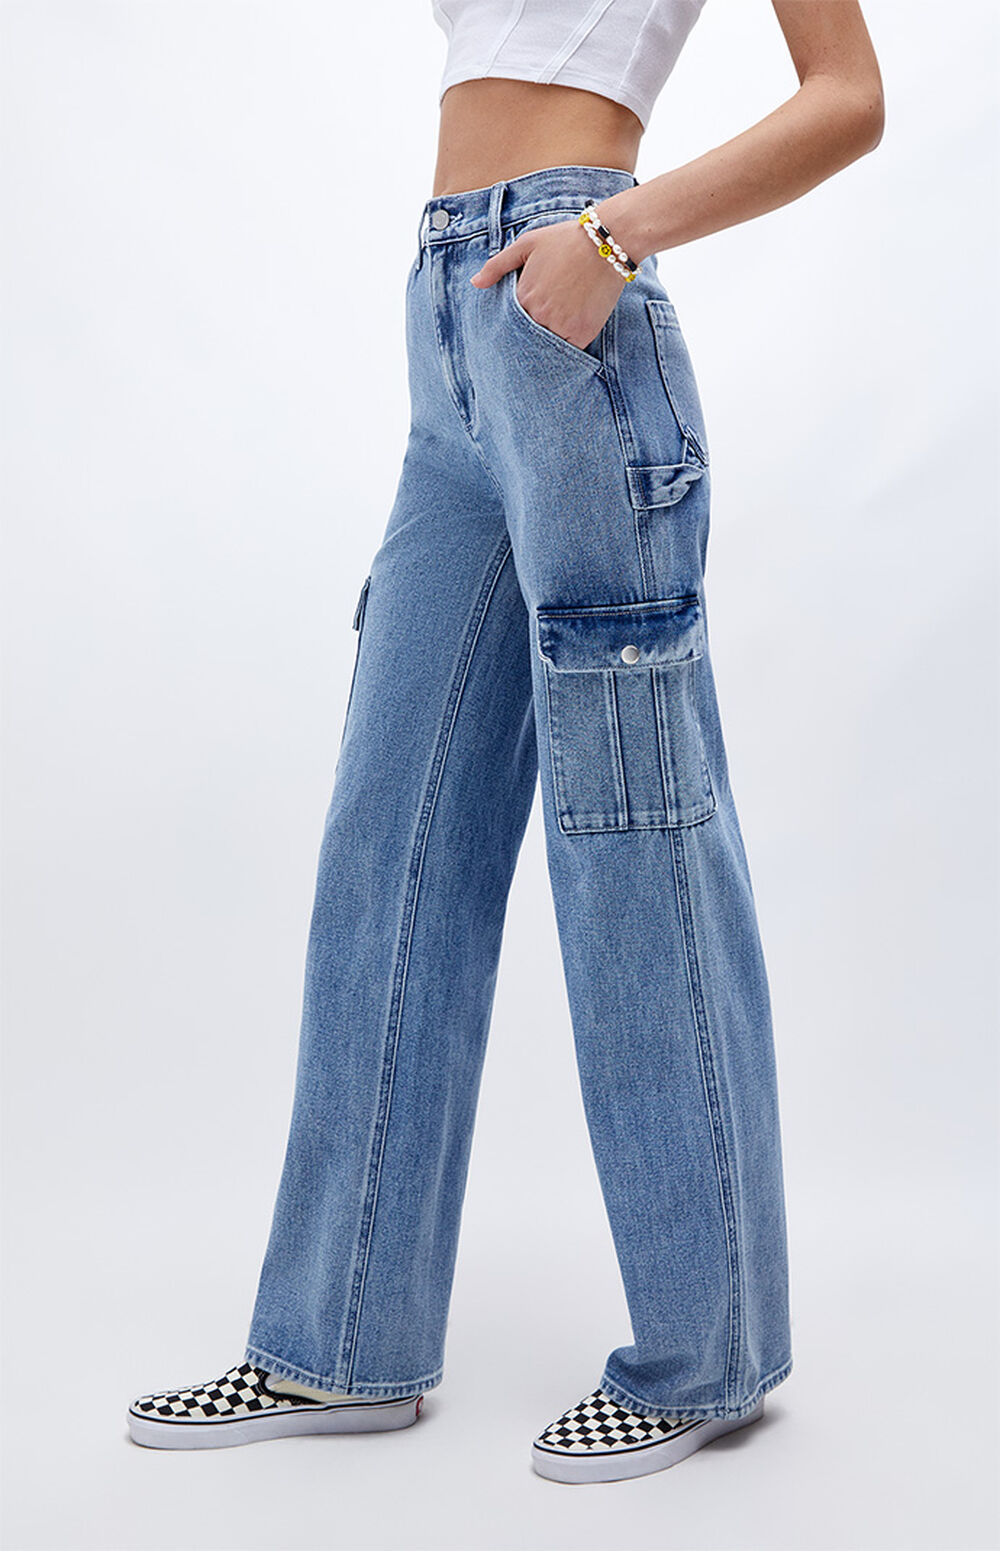 PacSun Cargo Ultra High Waisted Fitted Flare Pants | PacSun